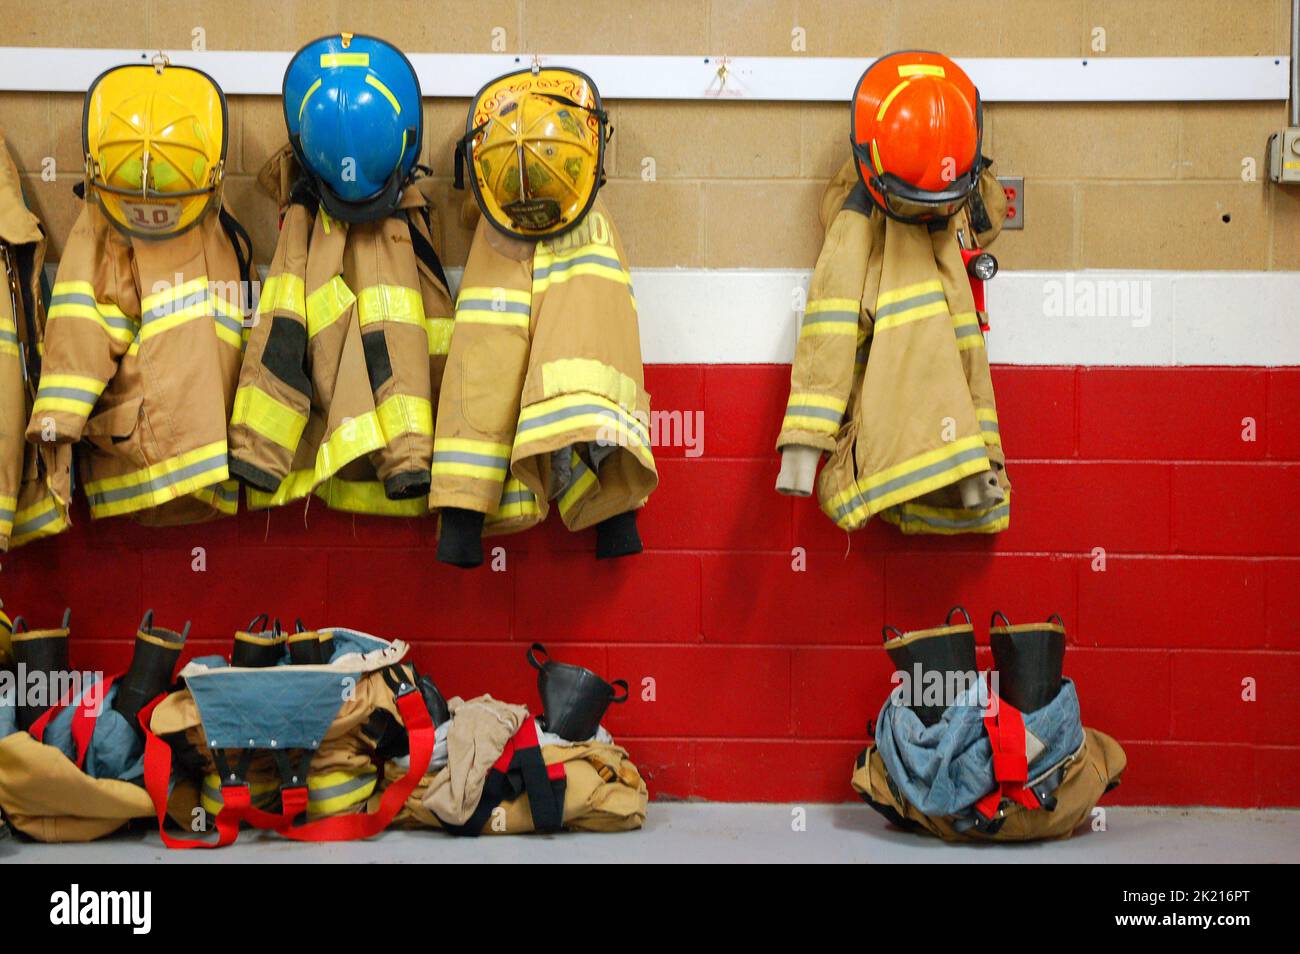 A fireman's equipment is hung and the jacket, boots and helmet placed  on the wall ready for the next fire emergency at a suburban fire department Stock Photo